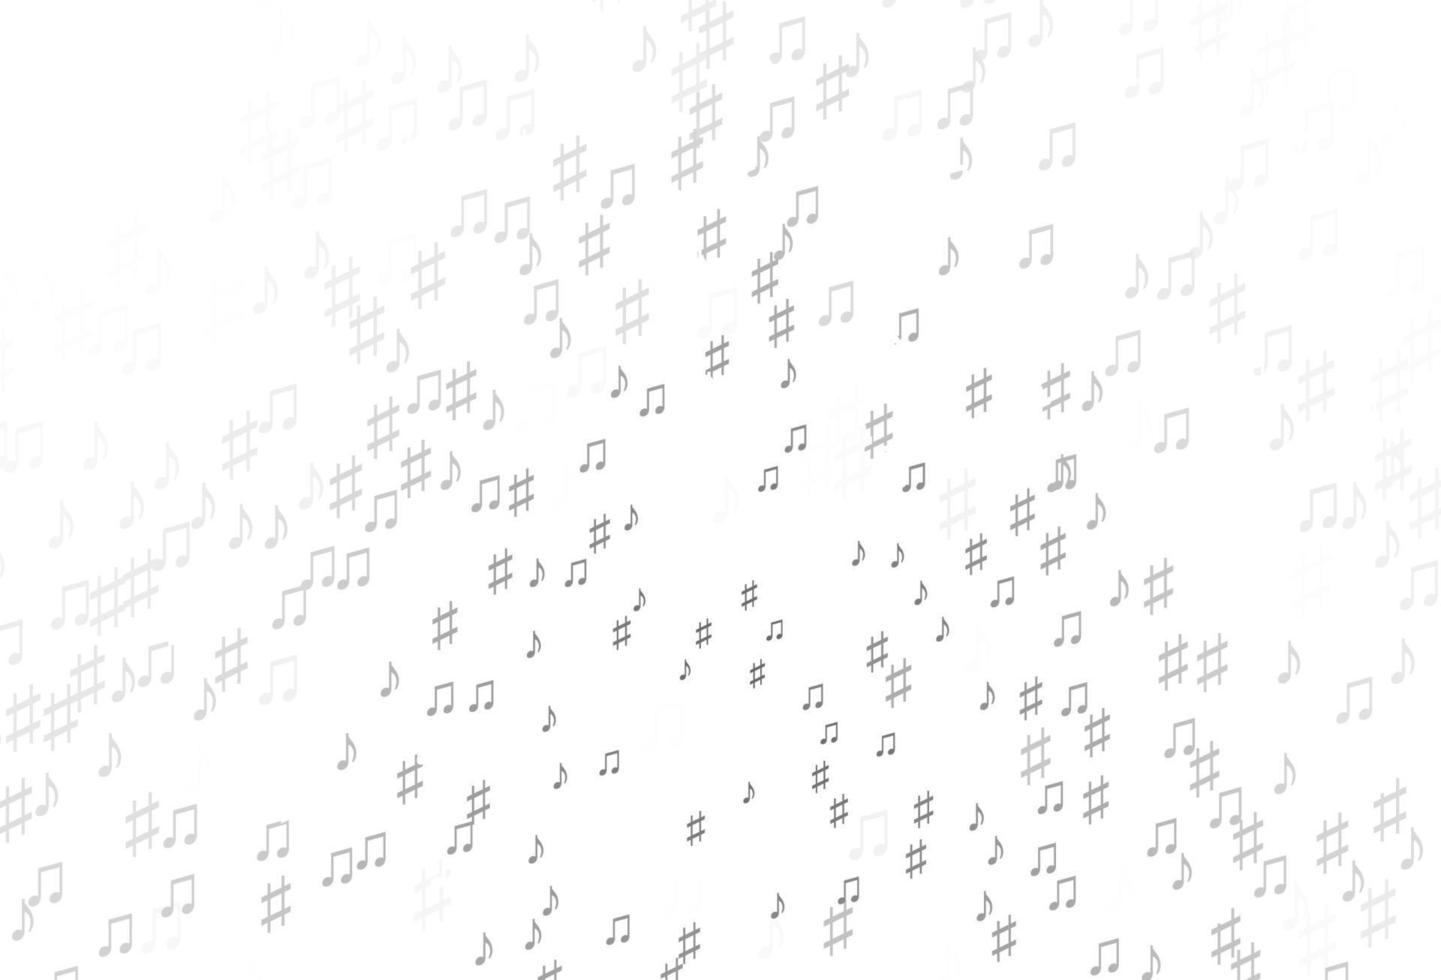 Light Silver, Gray vector background with music symbols.